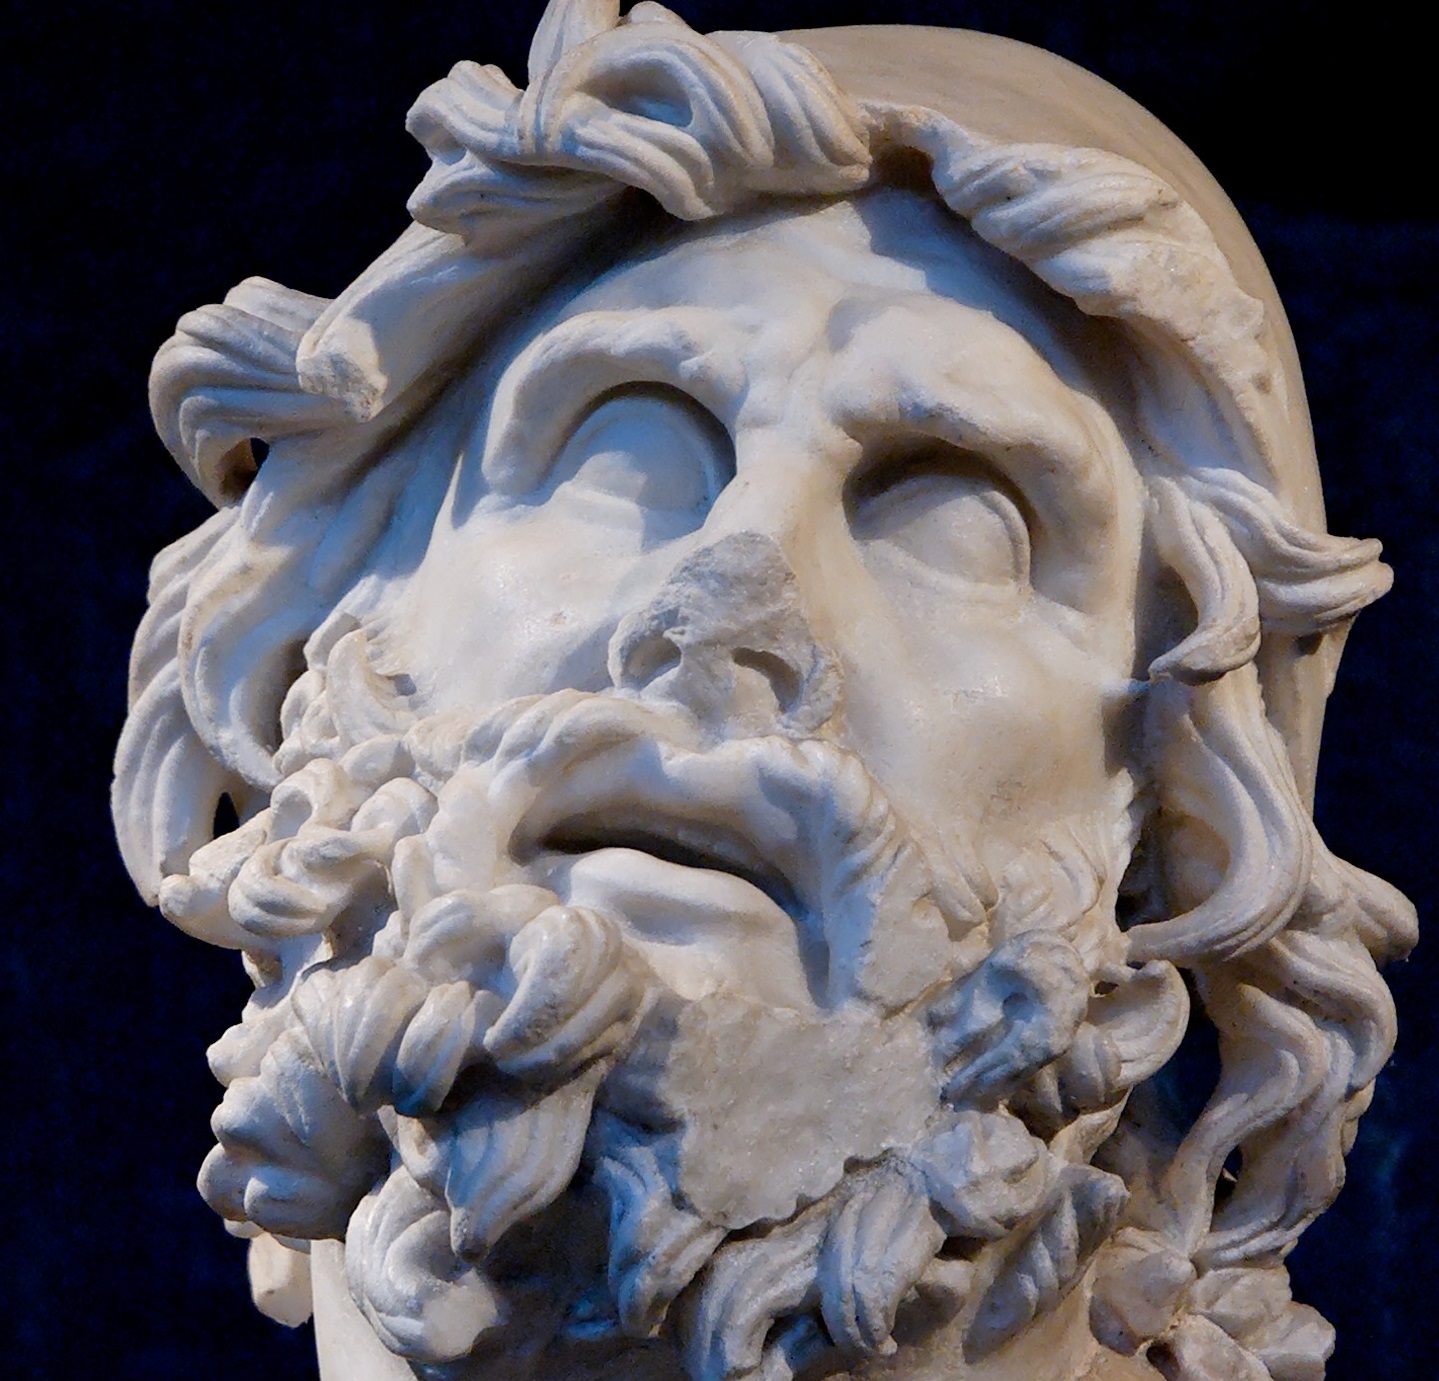 Odysseus is regarded as the wisest and most cunning of heroes, famed for using his wit before his strength